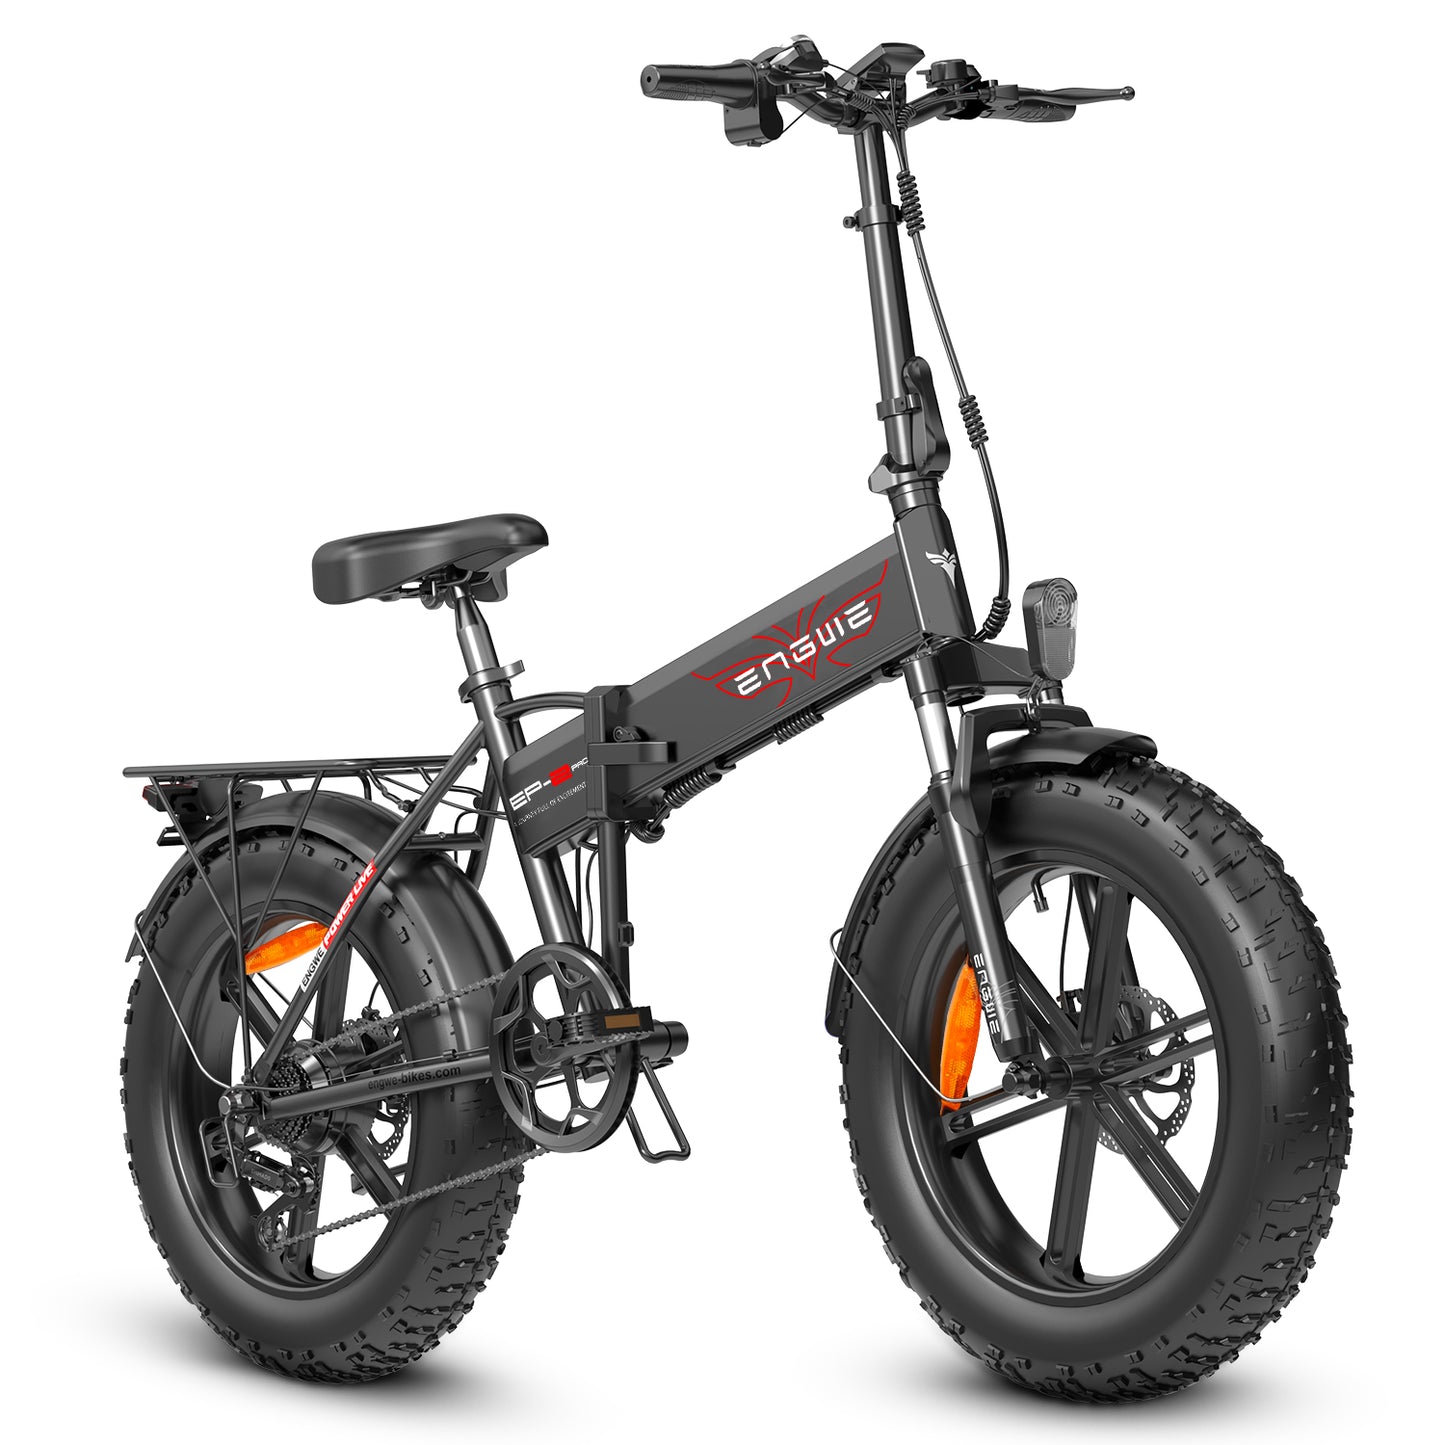 UK Warehouse Stock EP-2 PRO  20 Inch Foldable Fat Tire 48V Electric Bicycle with 750W Motor